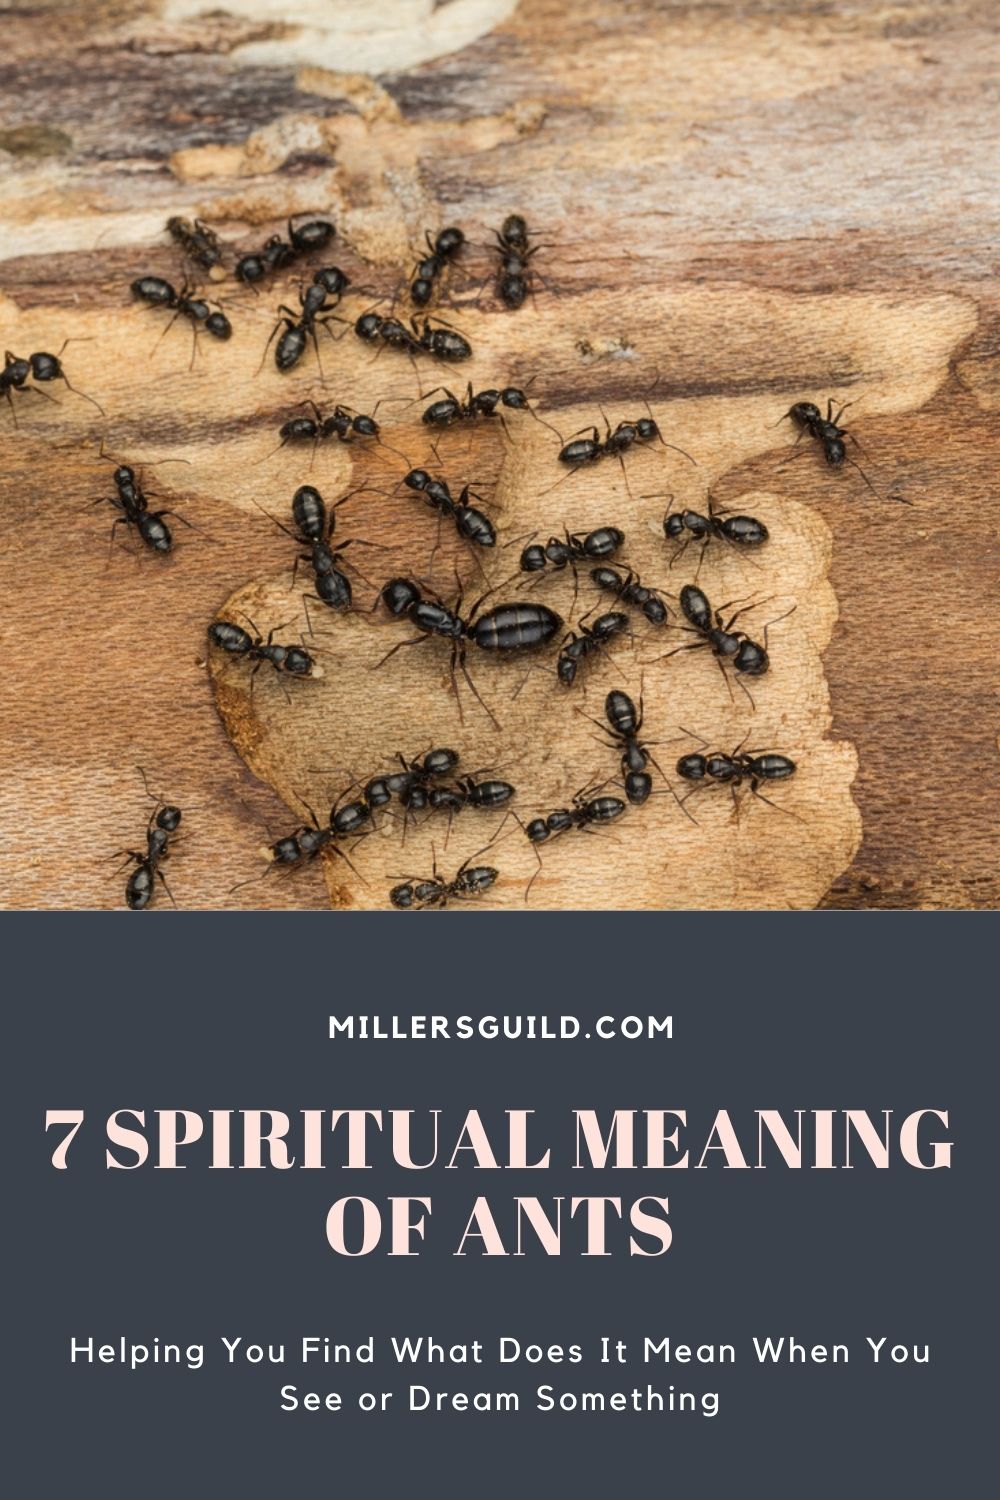 7 Spiritual Meaning of Ants